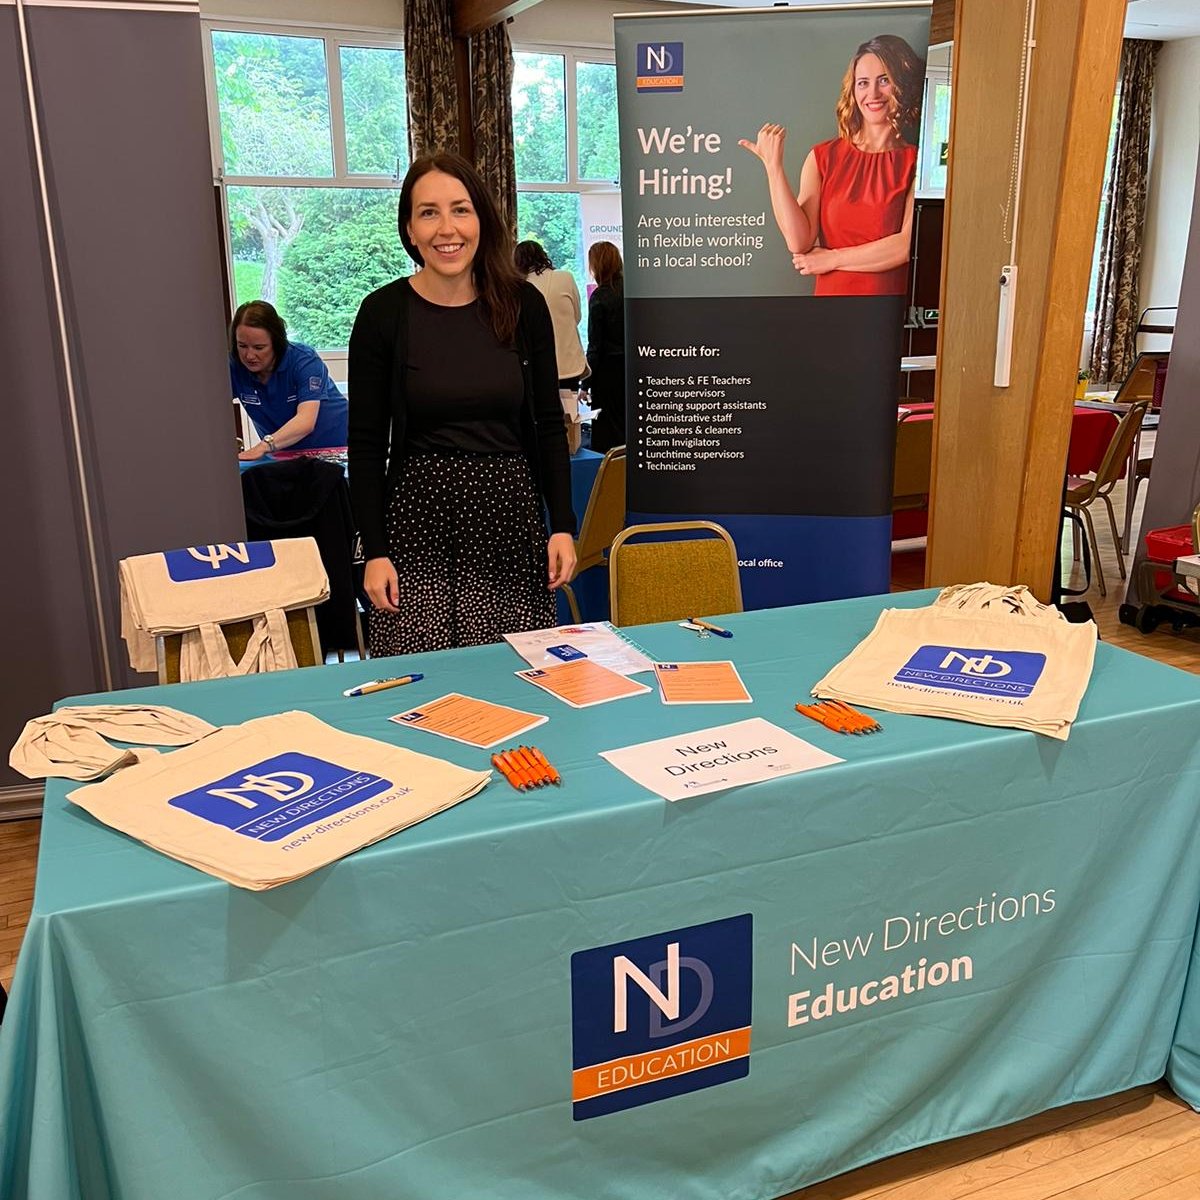 Amy and Jess are in Wrexham Memorial Hall today from 10am - 1pm discussing all things supply!📚✏️

If you are in the area today, and have 5 minutes - Pop in and have a friendly chat about the supply opportunities we have available 🍎

#JobFair #WrexhamJobs #SupplyOpportunities